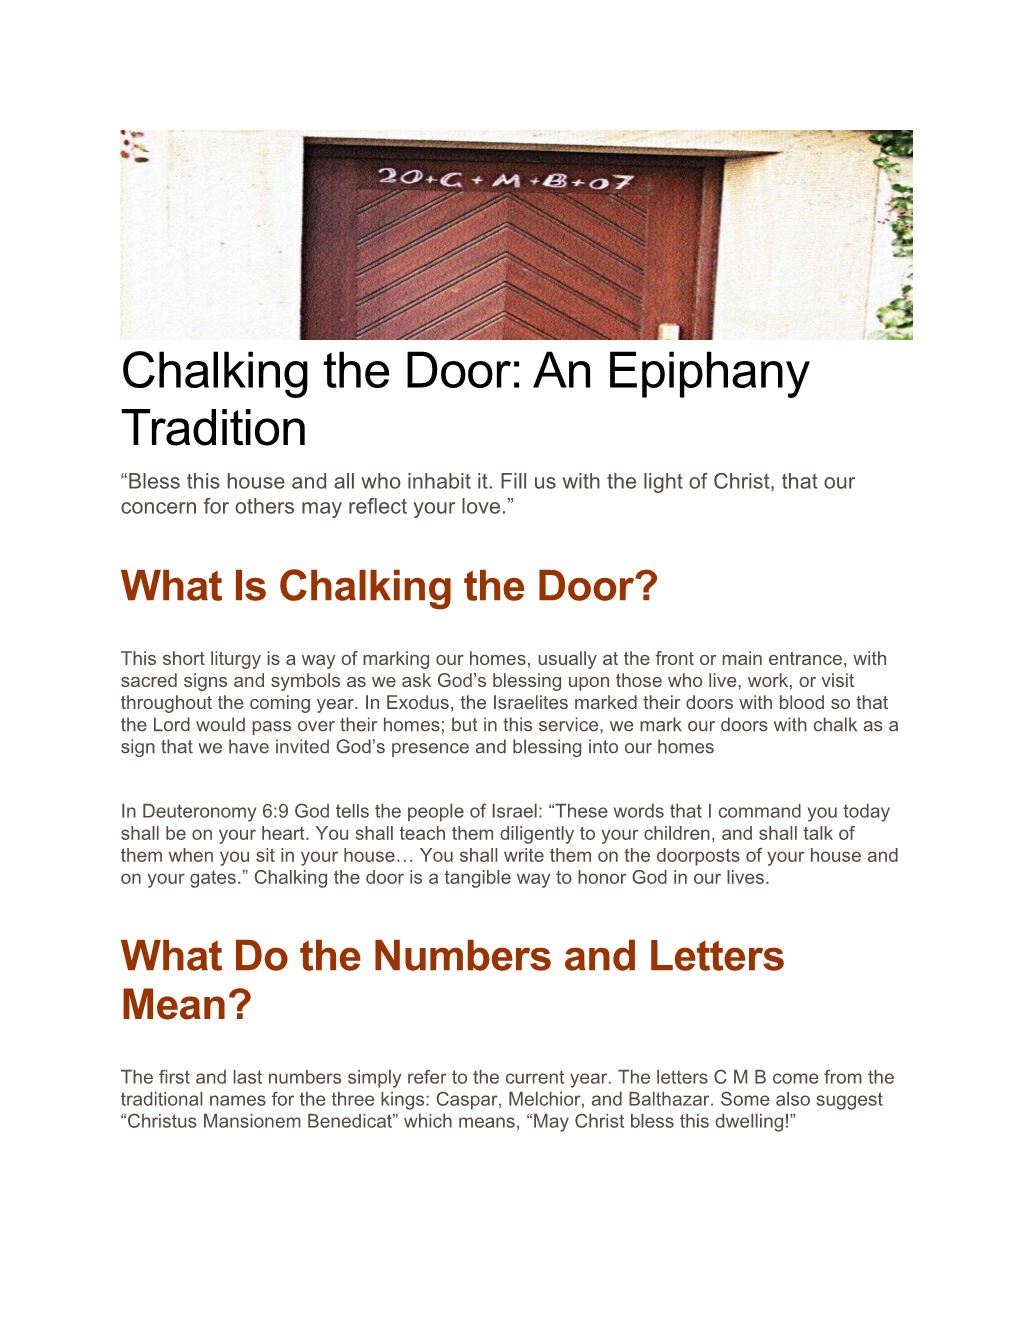 Chalking the Door: an Epiphany Tradition “Bless This House and All Who Inhabit It